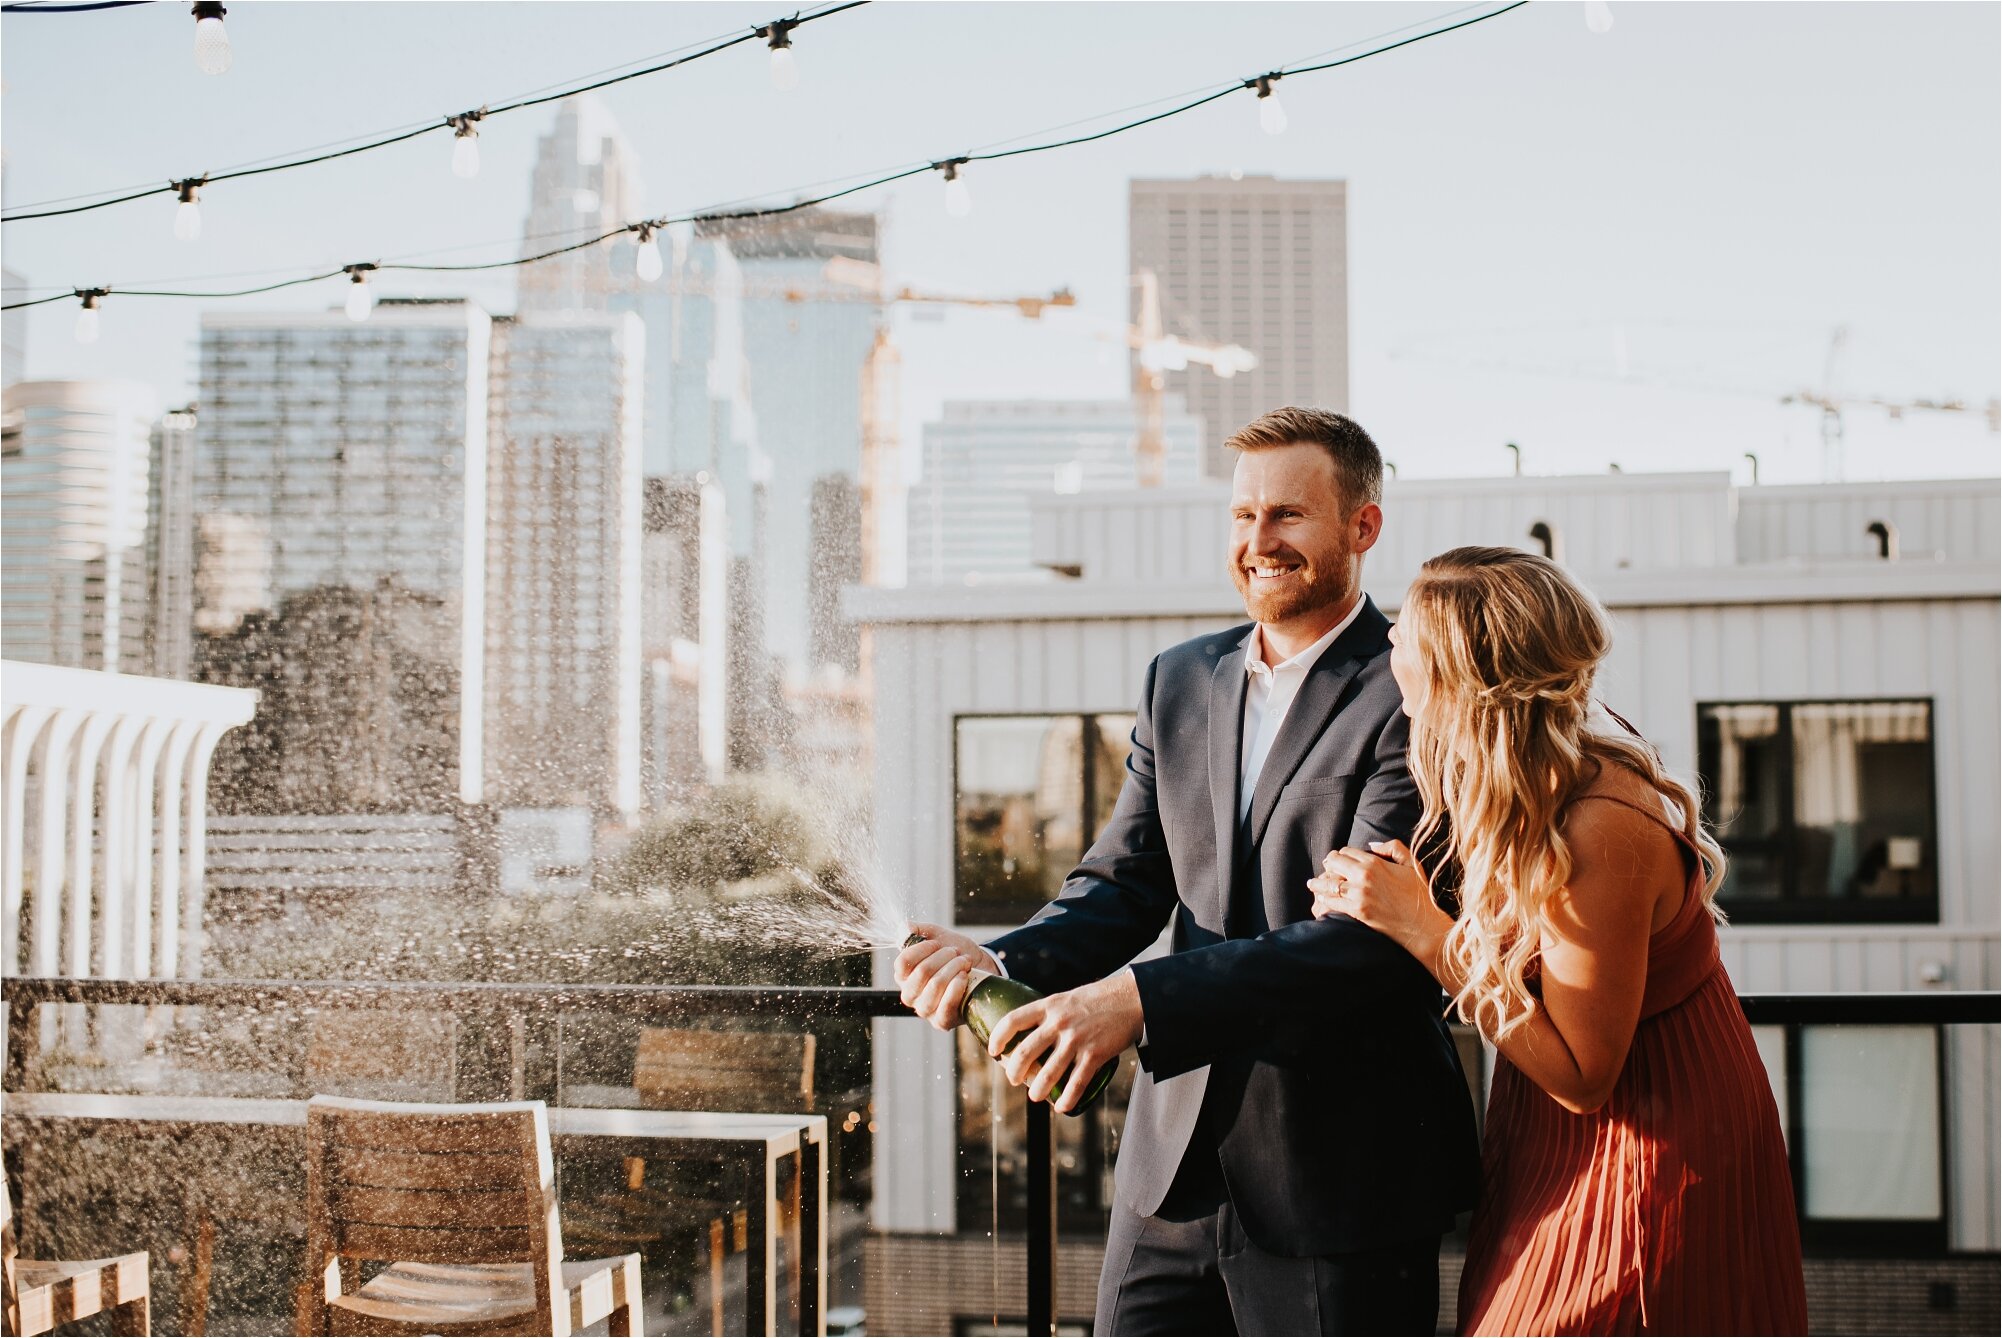  north loop minneapolis engagement session couple minnesota wedding photographer engaged photos summer instagram hewing hotel rooftop champagne celebrate 